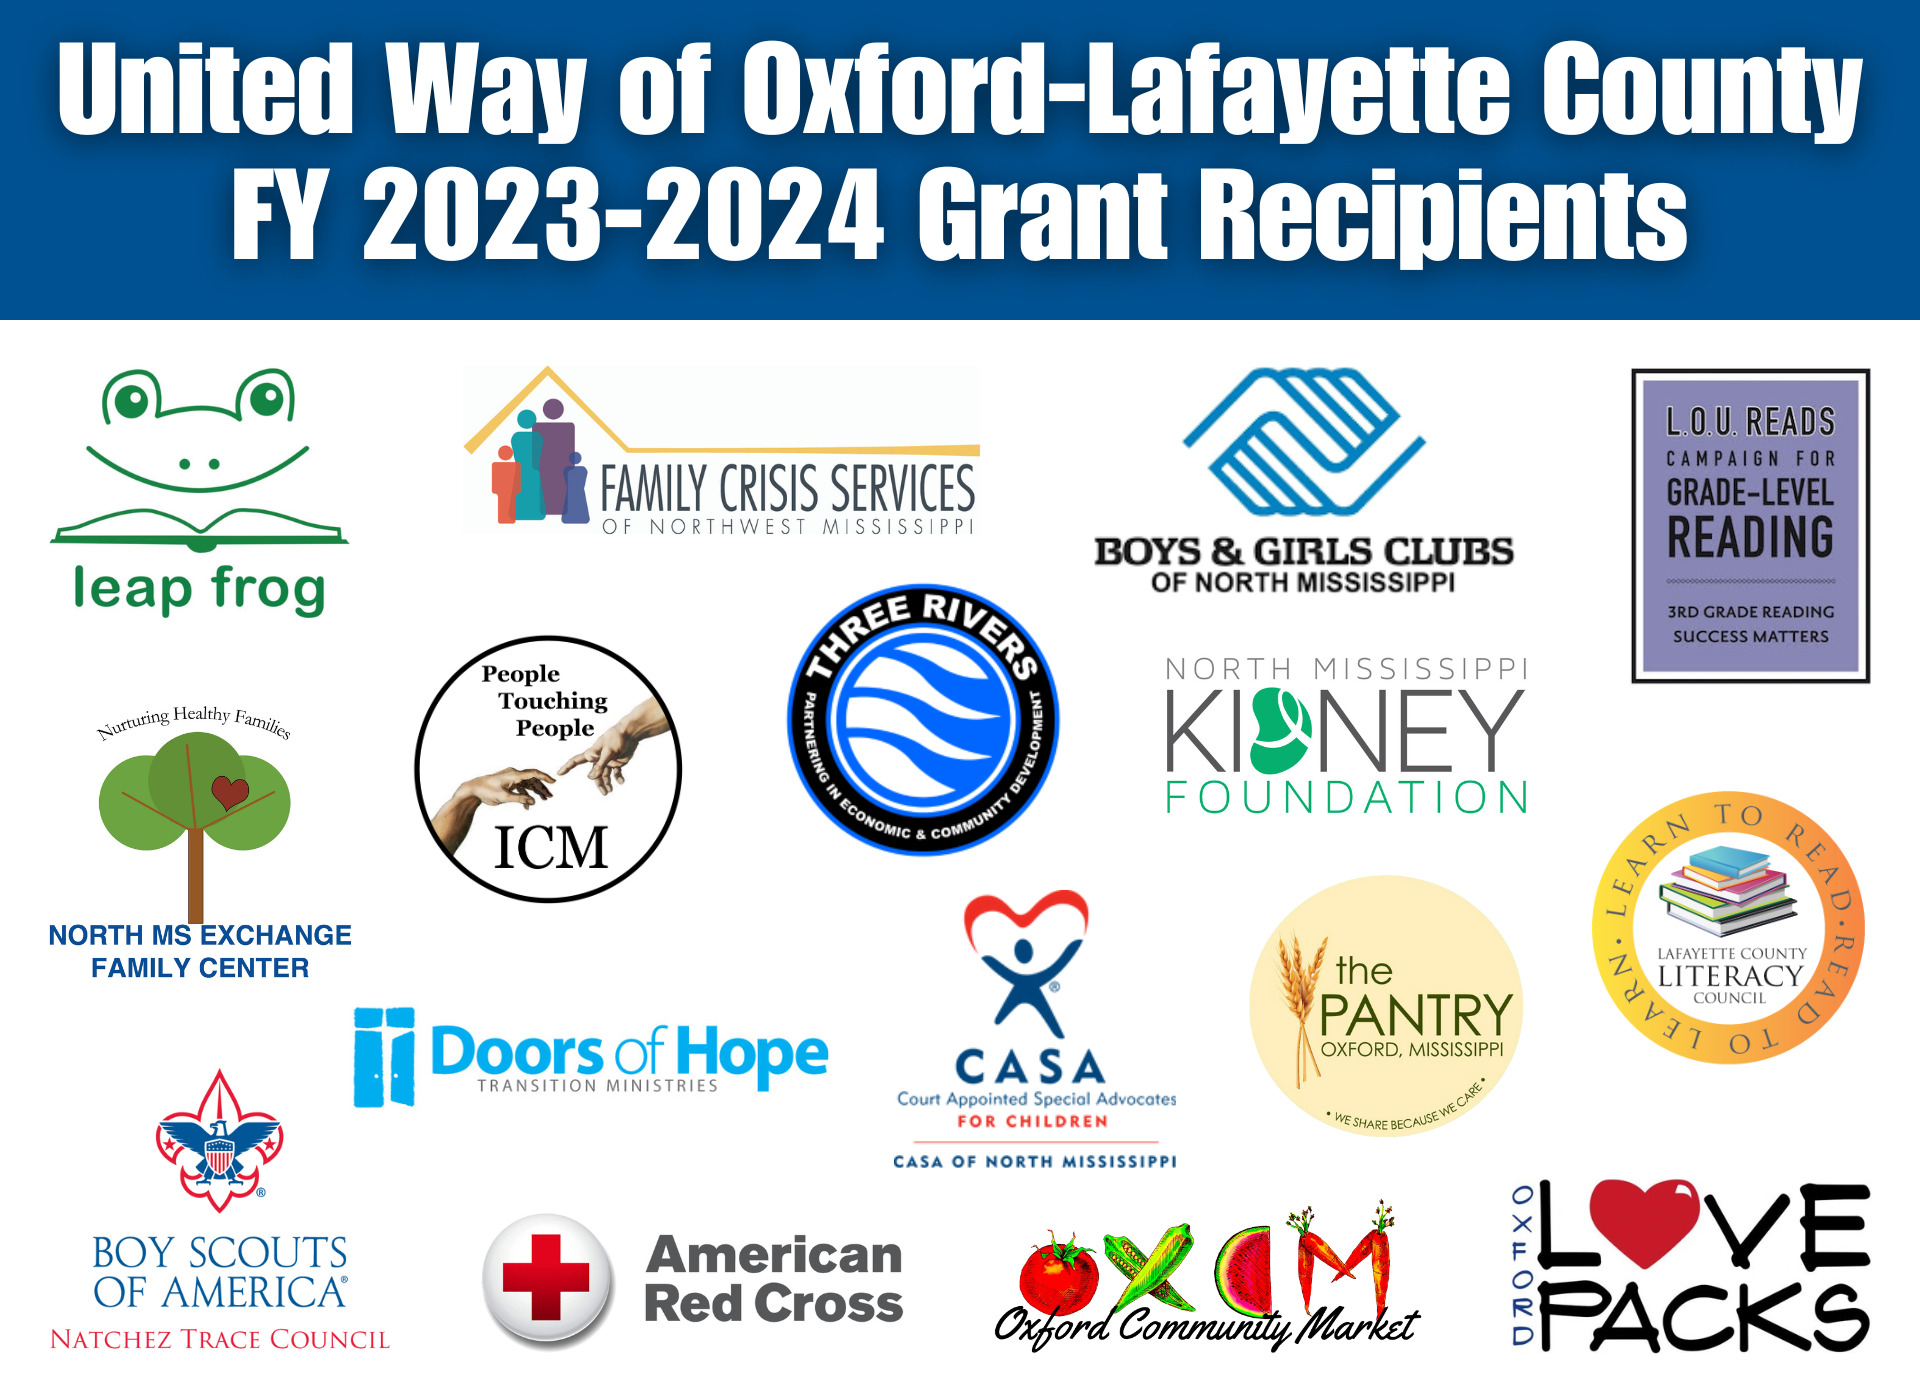 United Way of Oxford-Lafayette County Awards $210K in Grant Funds 